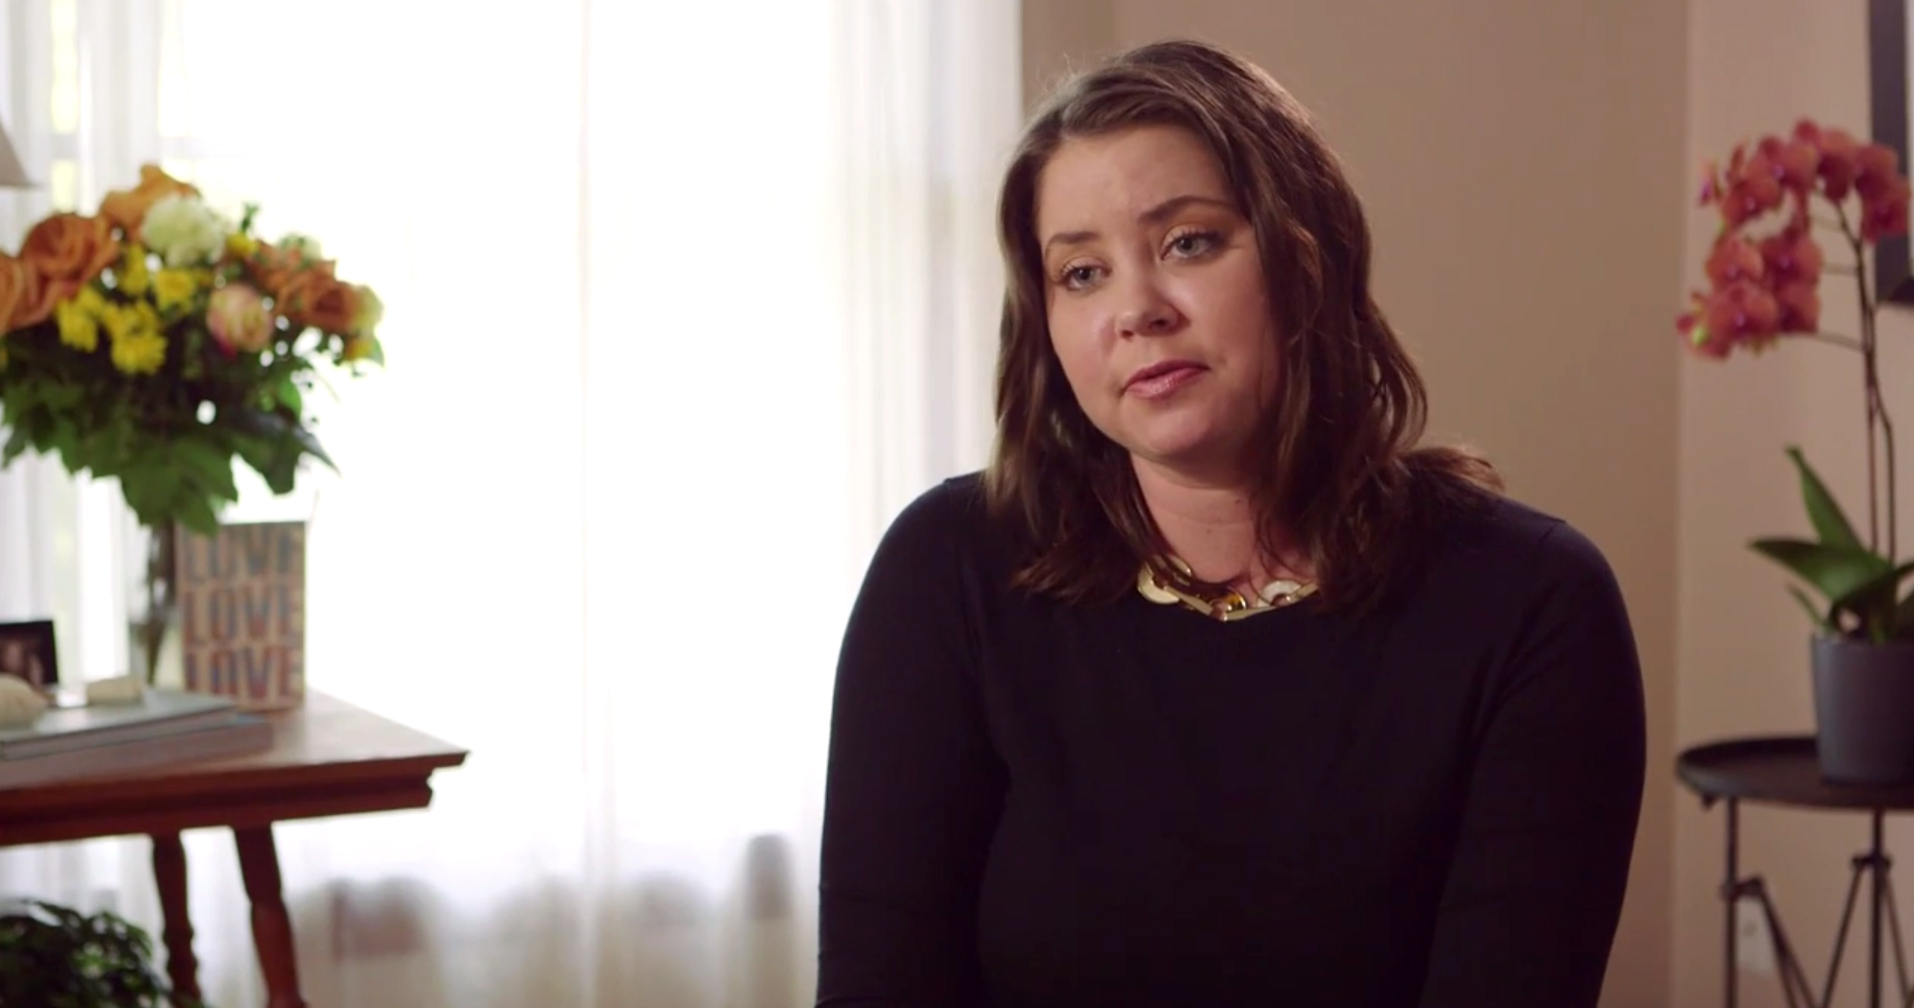 PHOTO: Brittany Maynard, a 29-year-old with terminal illness, is fighting to expand the death-with-dignity option to all.